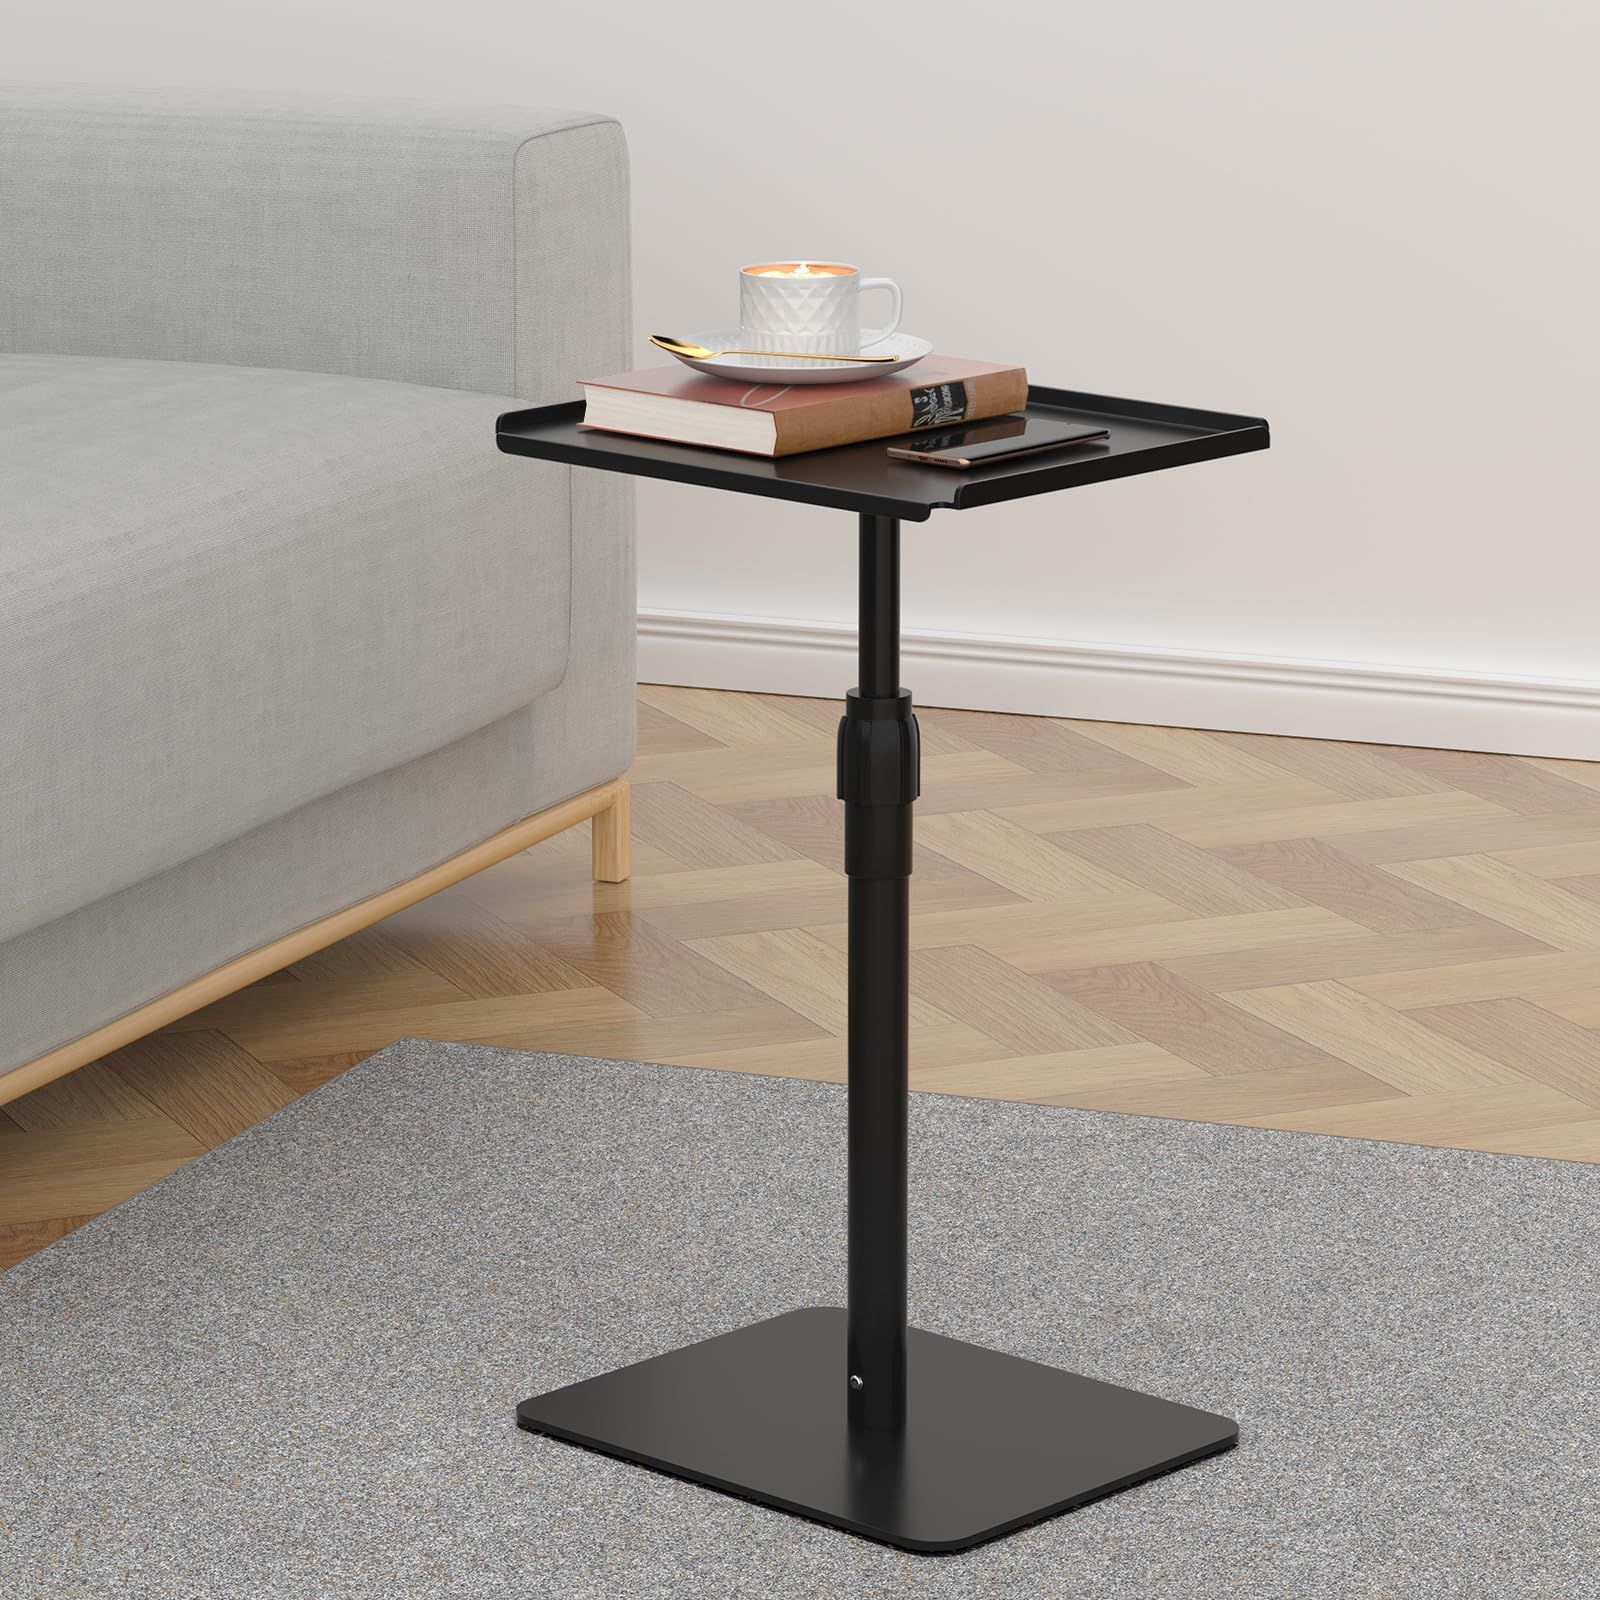 Recent Metal Side Tables For Living Spaces Regarding Amazon: Rchyfeed Height Adjustable End Table, Small Metal Side Table  For Small Spaces, Square Drink Tables For Living Room Bedroom Dorm Office,  Place Snacks, Books, Meals, Magazines, Phones On The Top : (View 2 of 10)